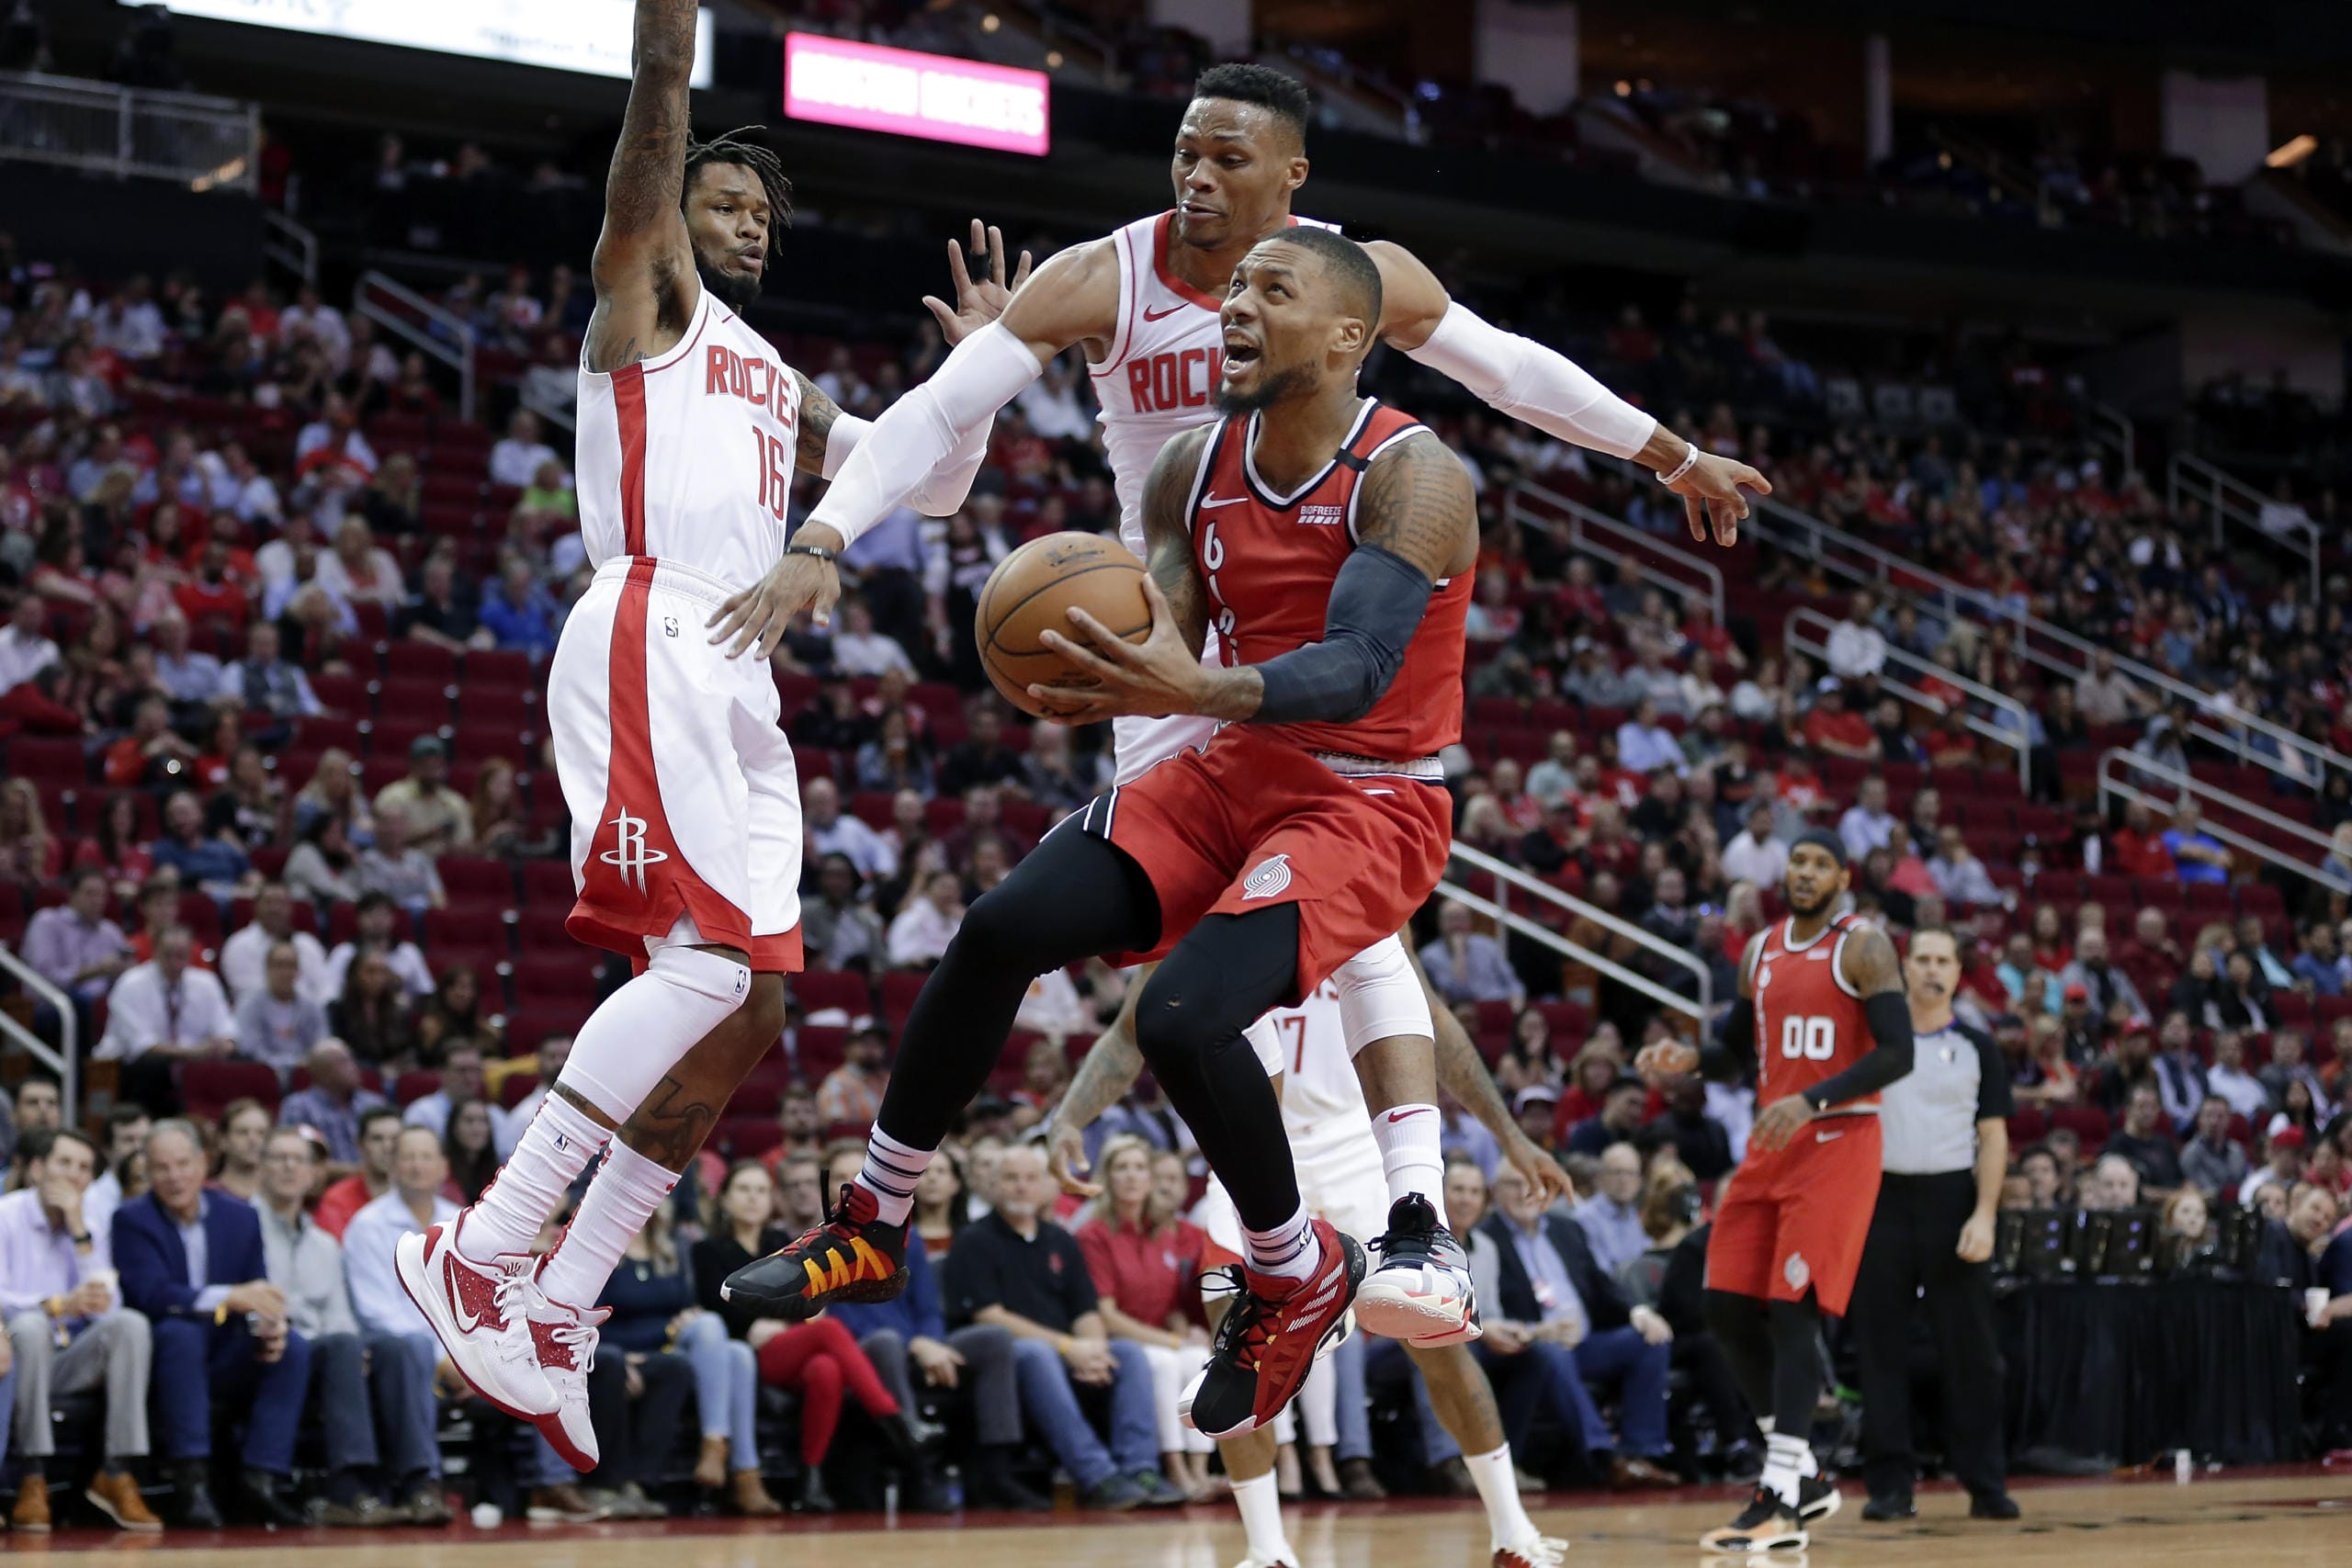 Portland Trail Blazers guard Damian Lillard, middle, puts up a shot in front of Houston Rockets guard Ben McLemore (16) and guard Russell Westbrook, back, as forward Carmelo Anthony (00) looks on during the first half of an NBA basketball game Wednesday, Jan. 15, 2020, in Houston.